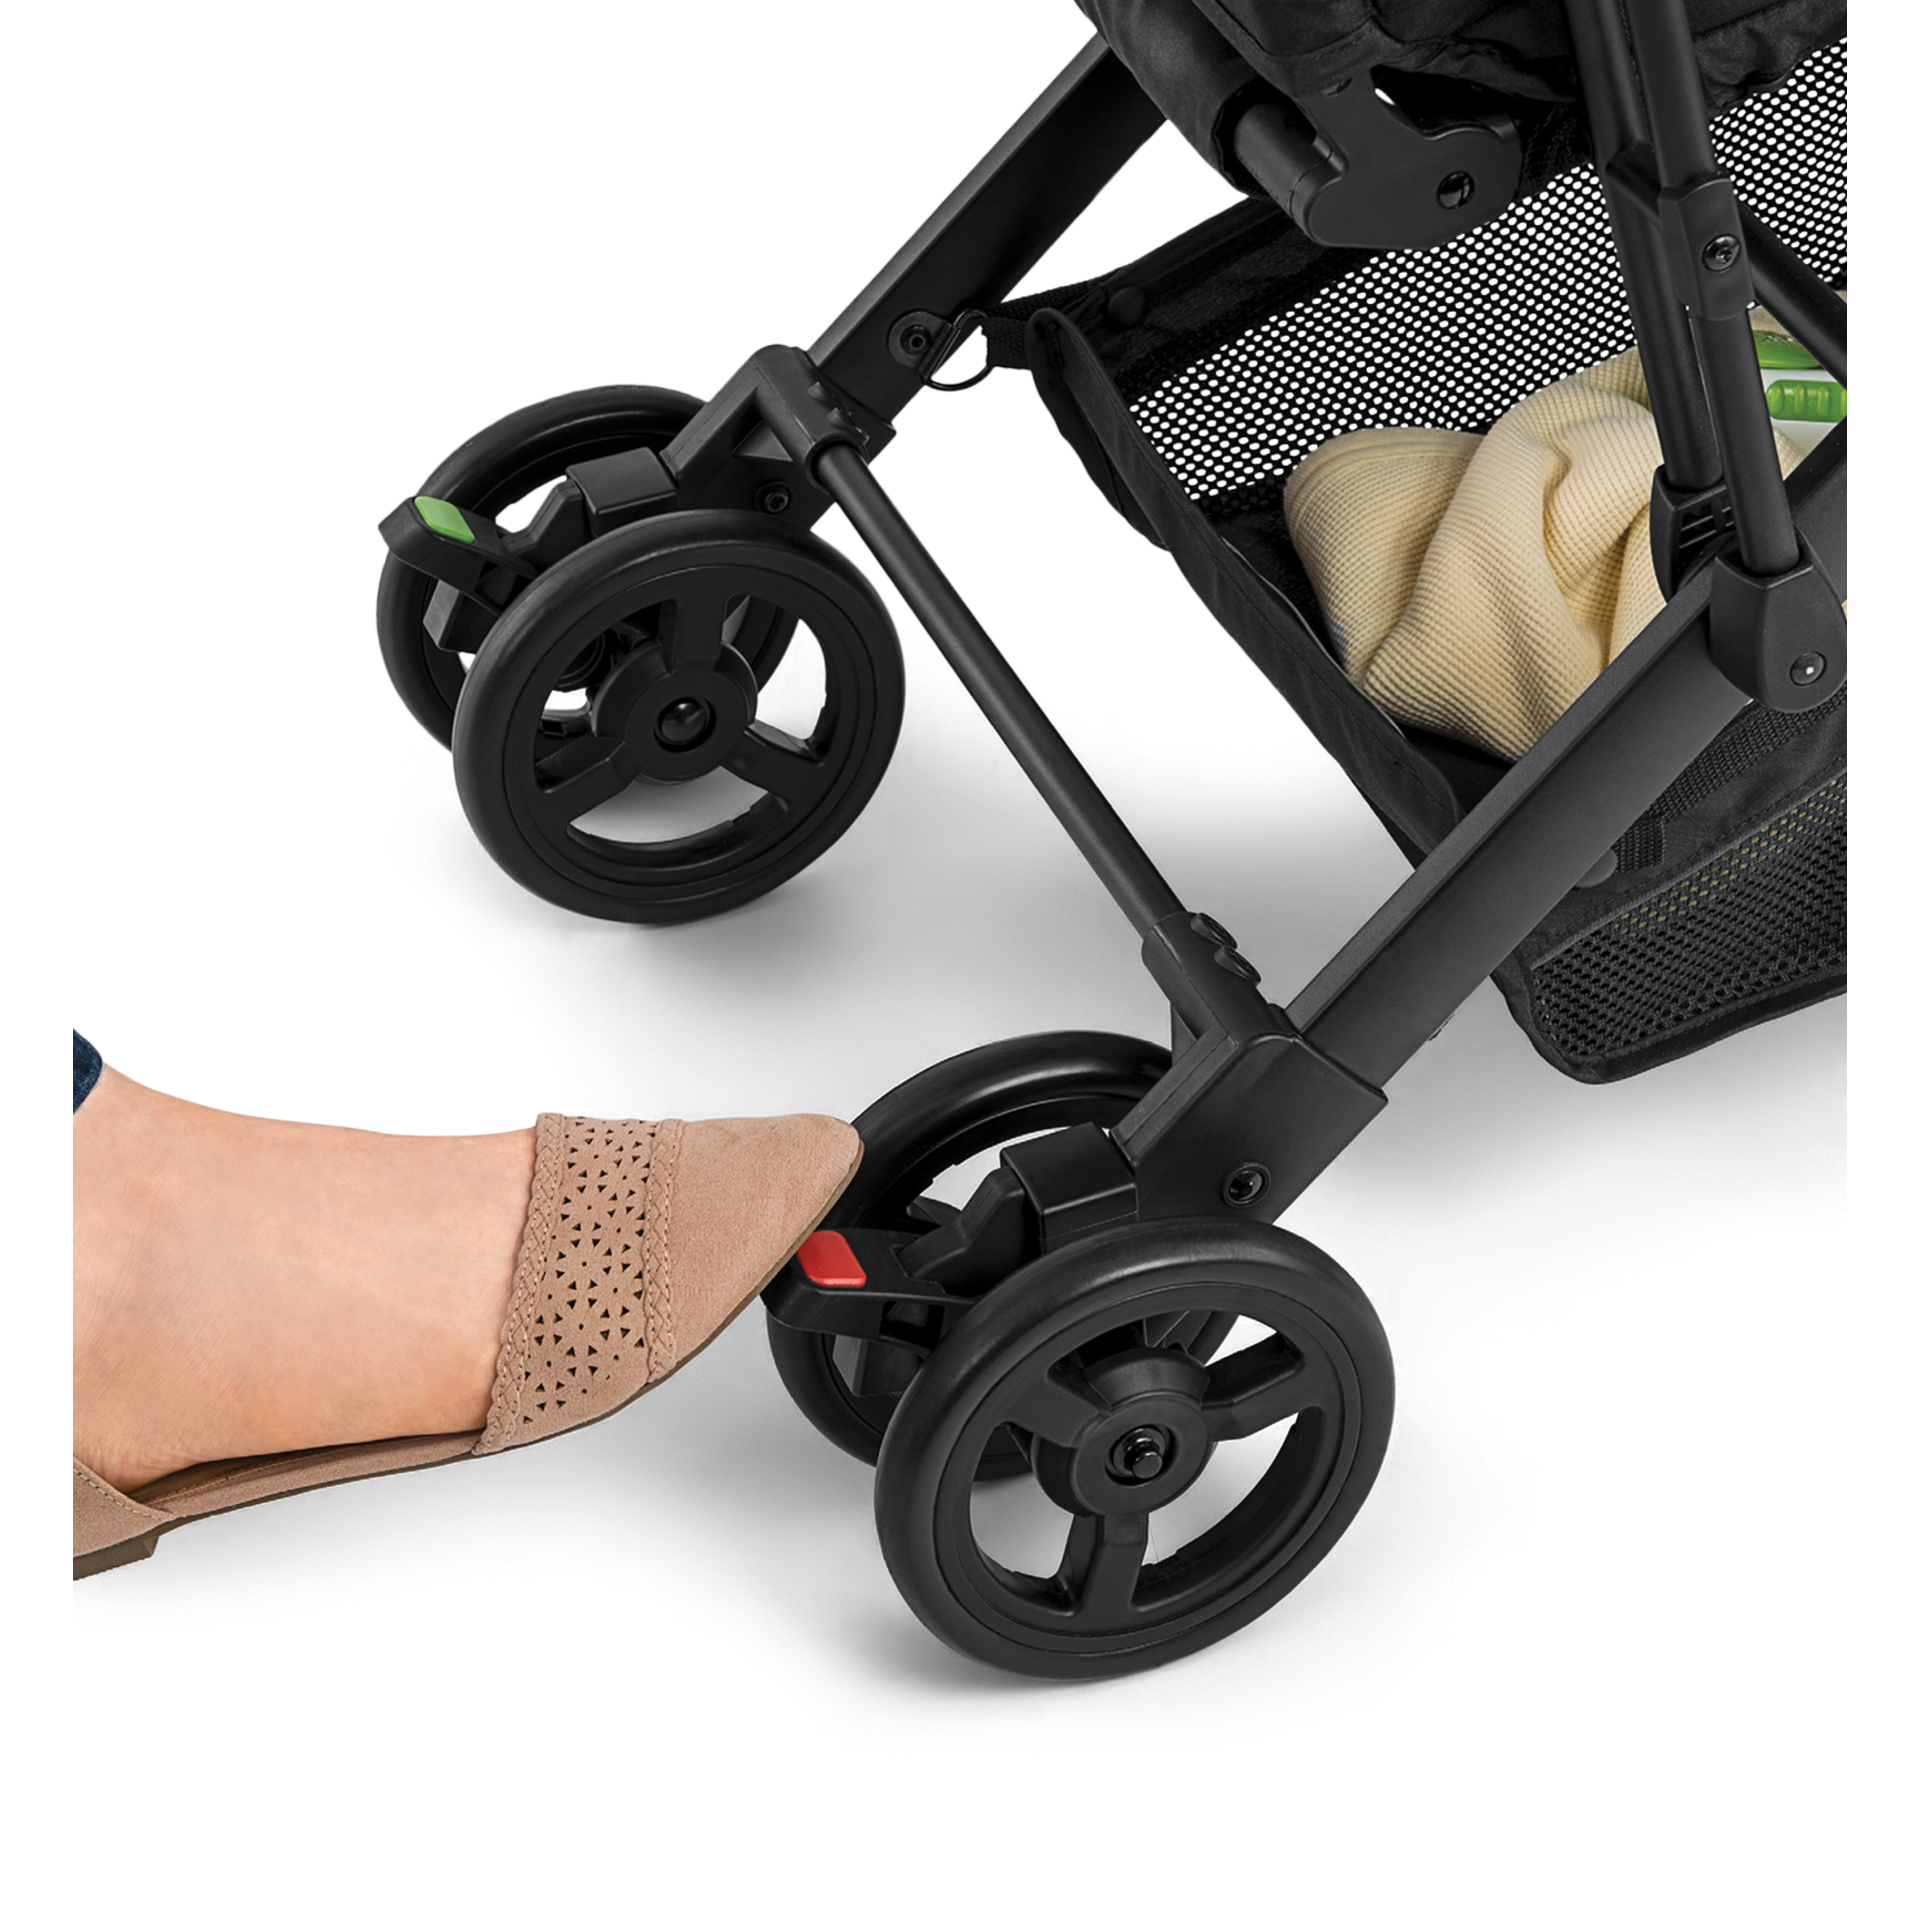 piccolo stroller review